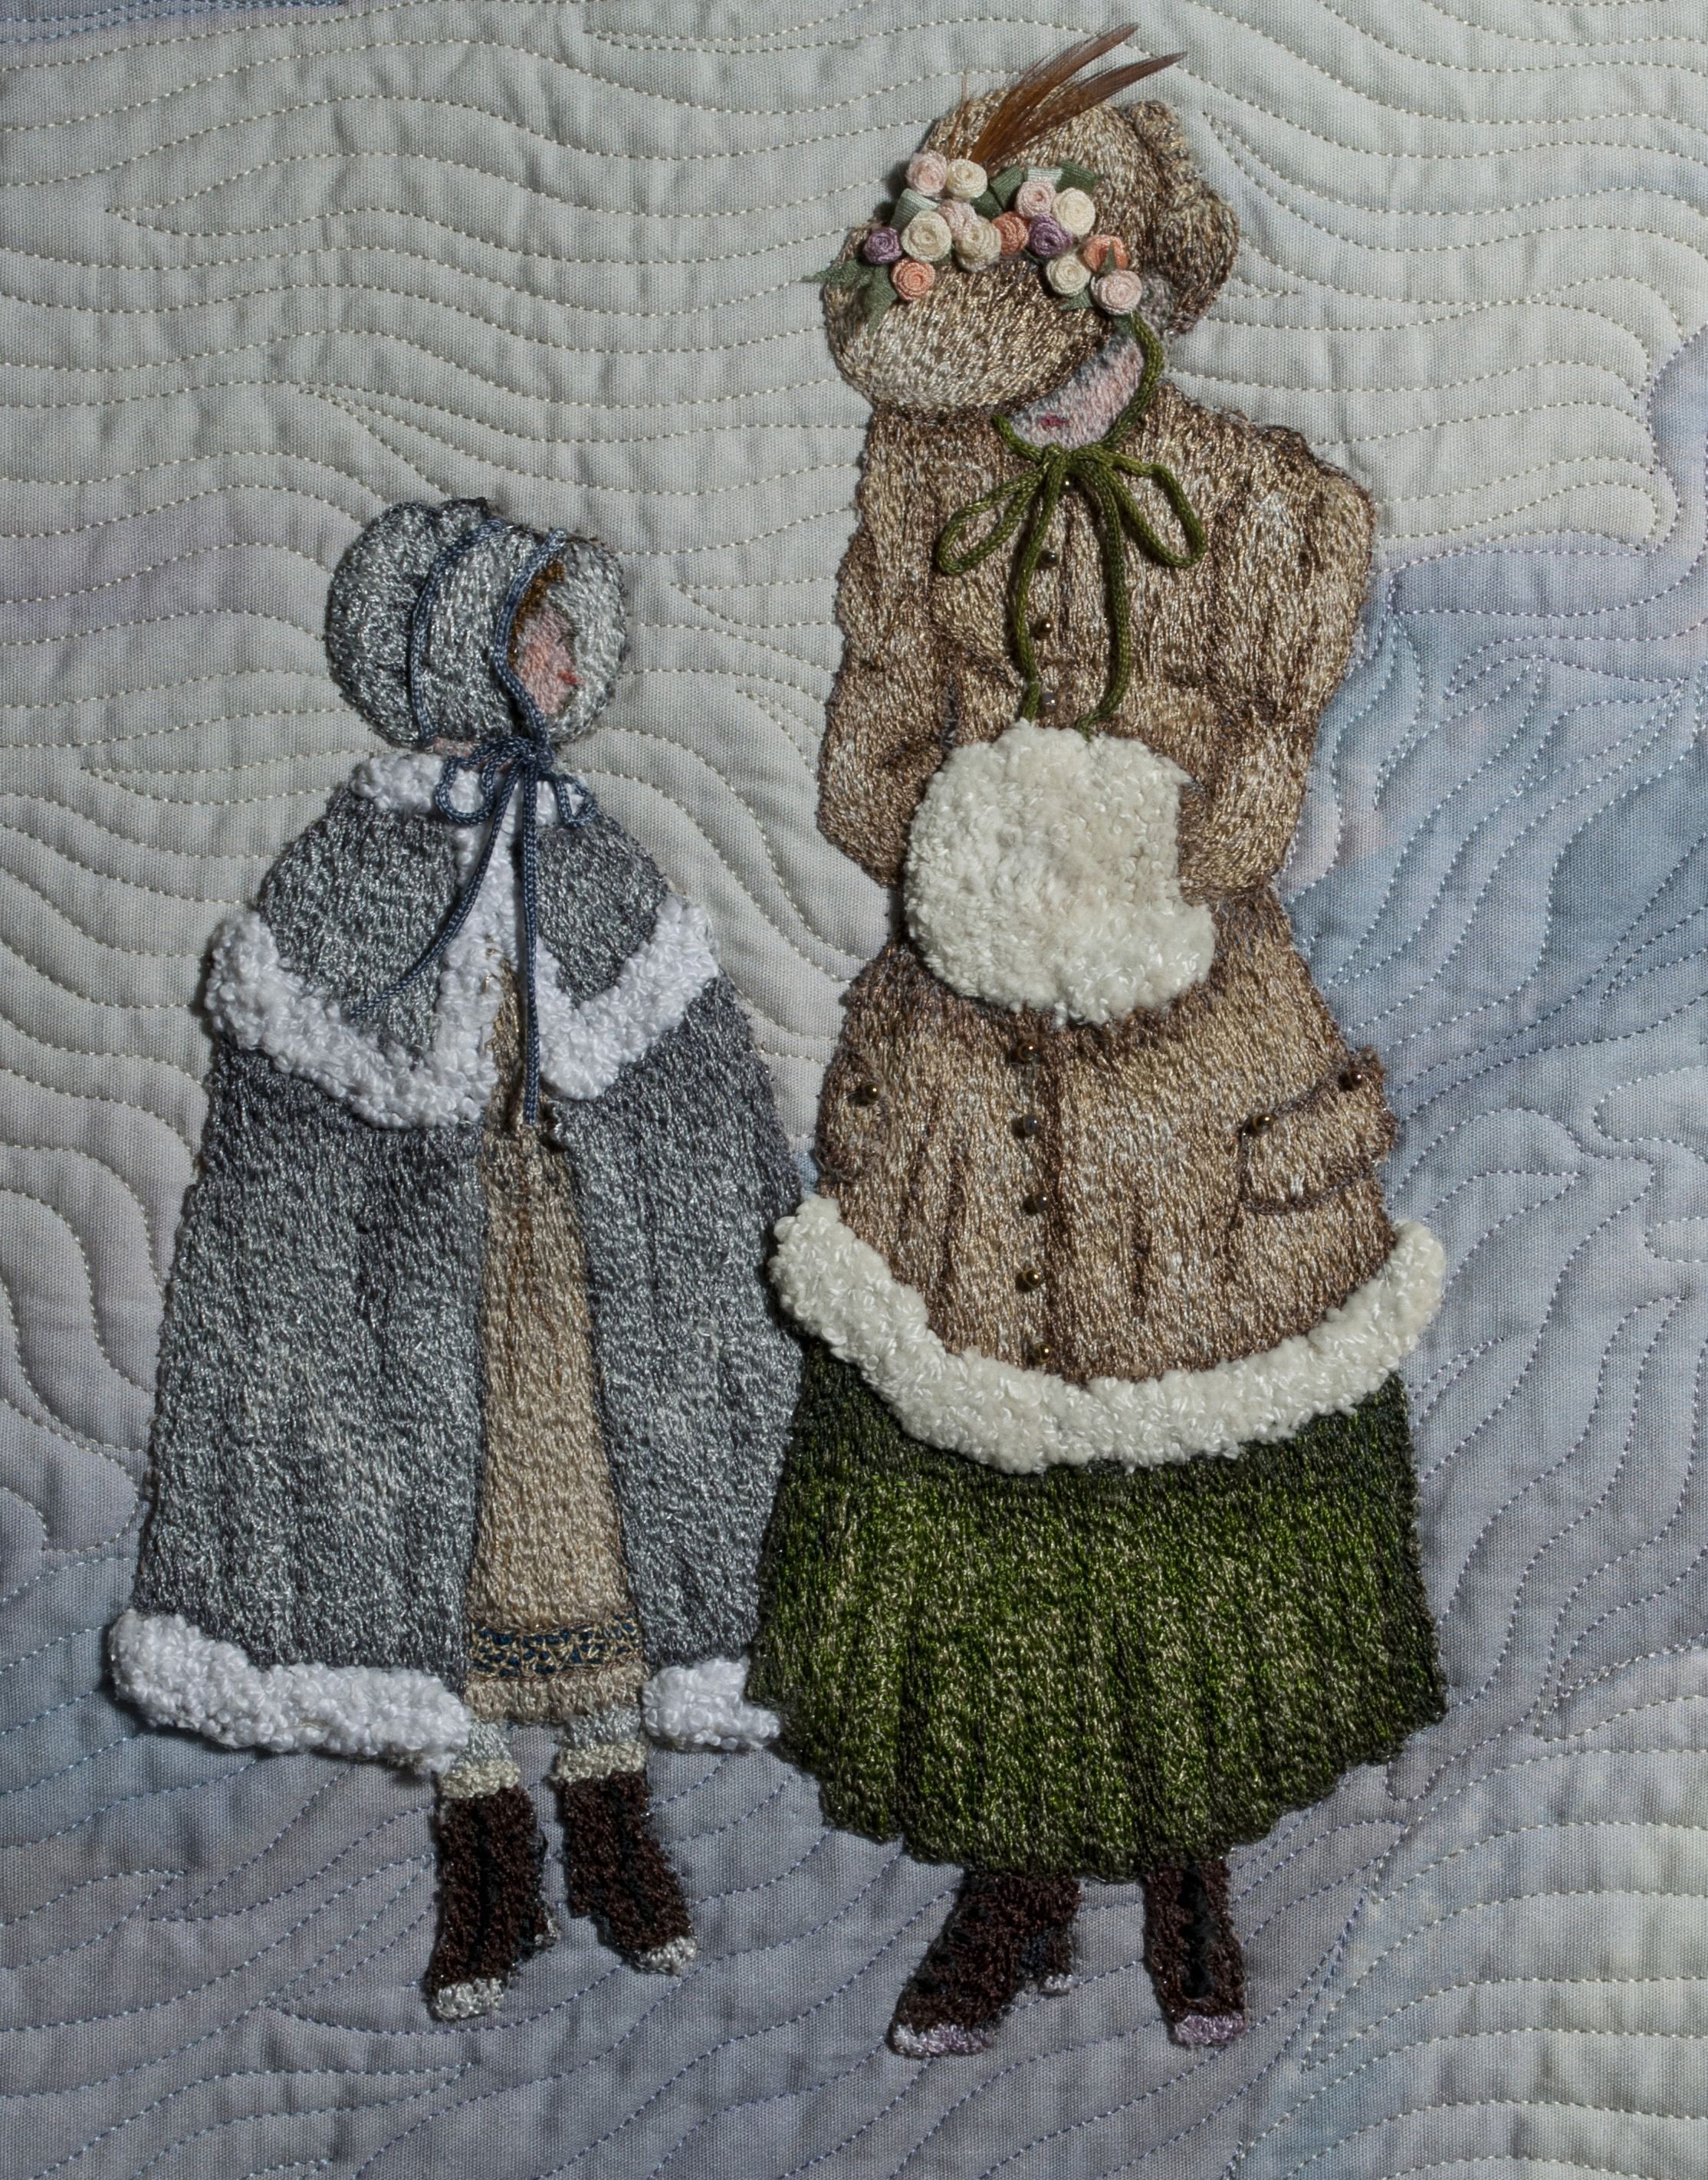 Woman with muff & girl